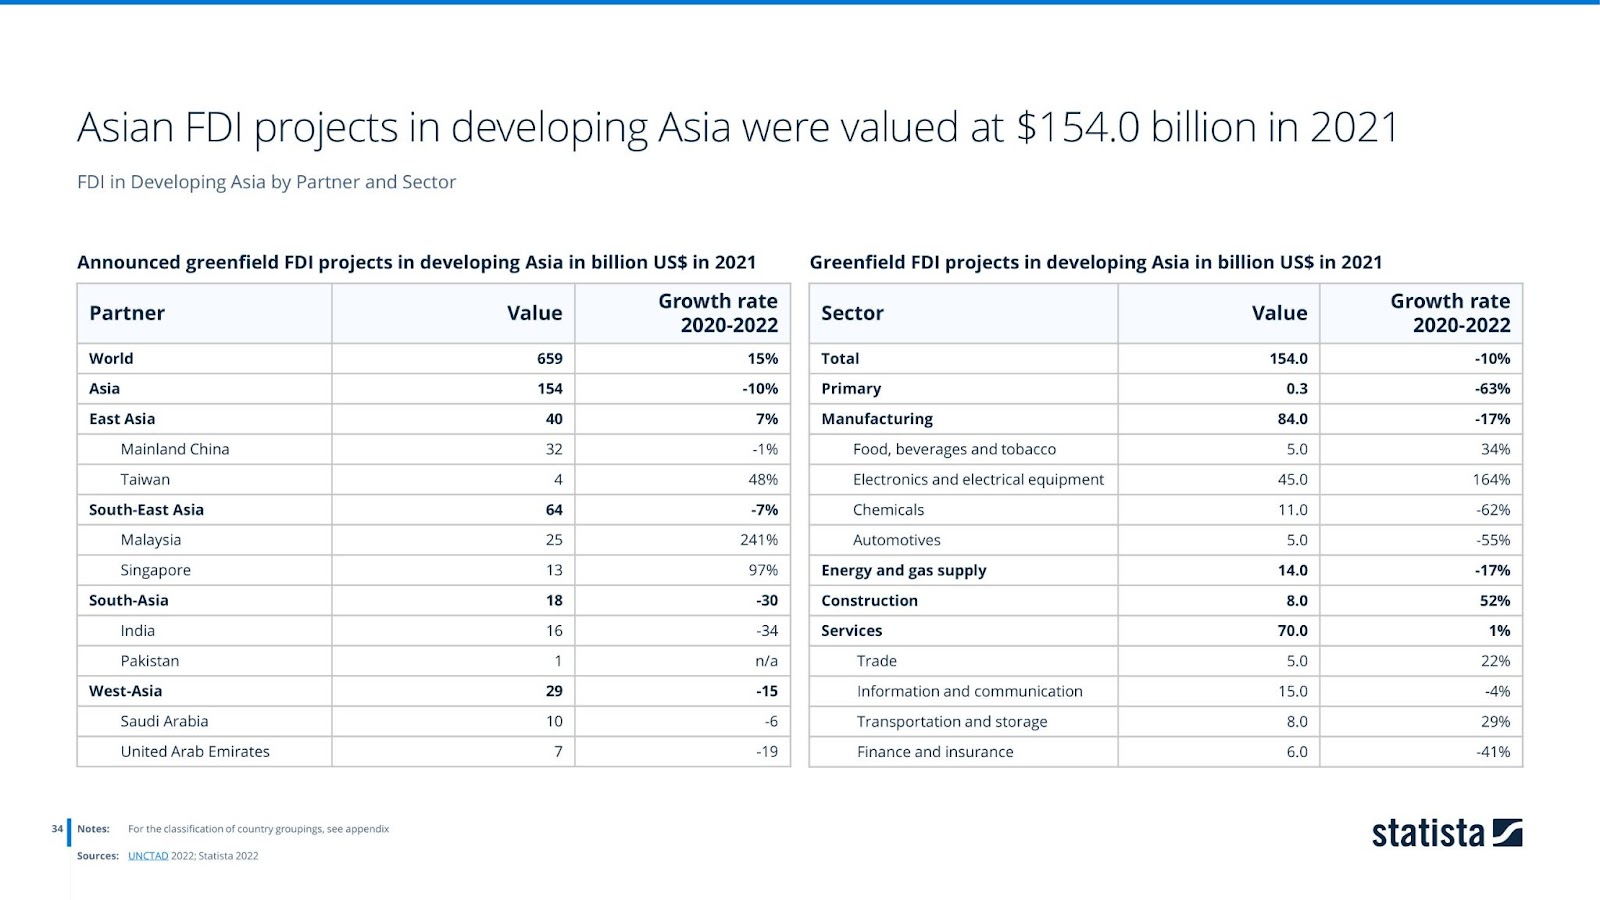 FDI in developing Asia by partner and sector